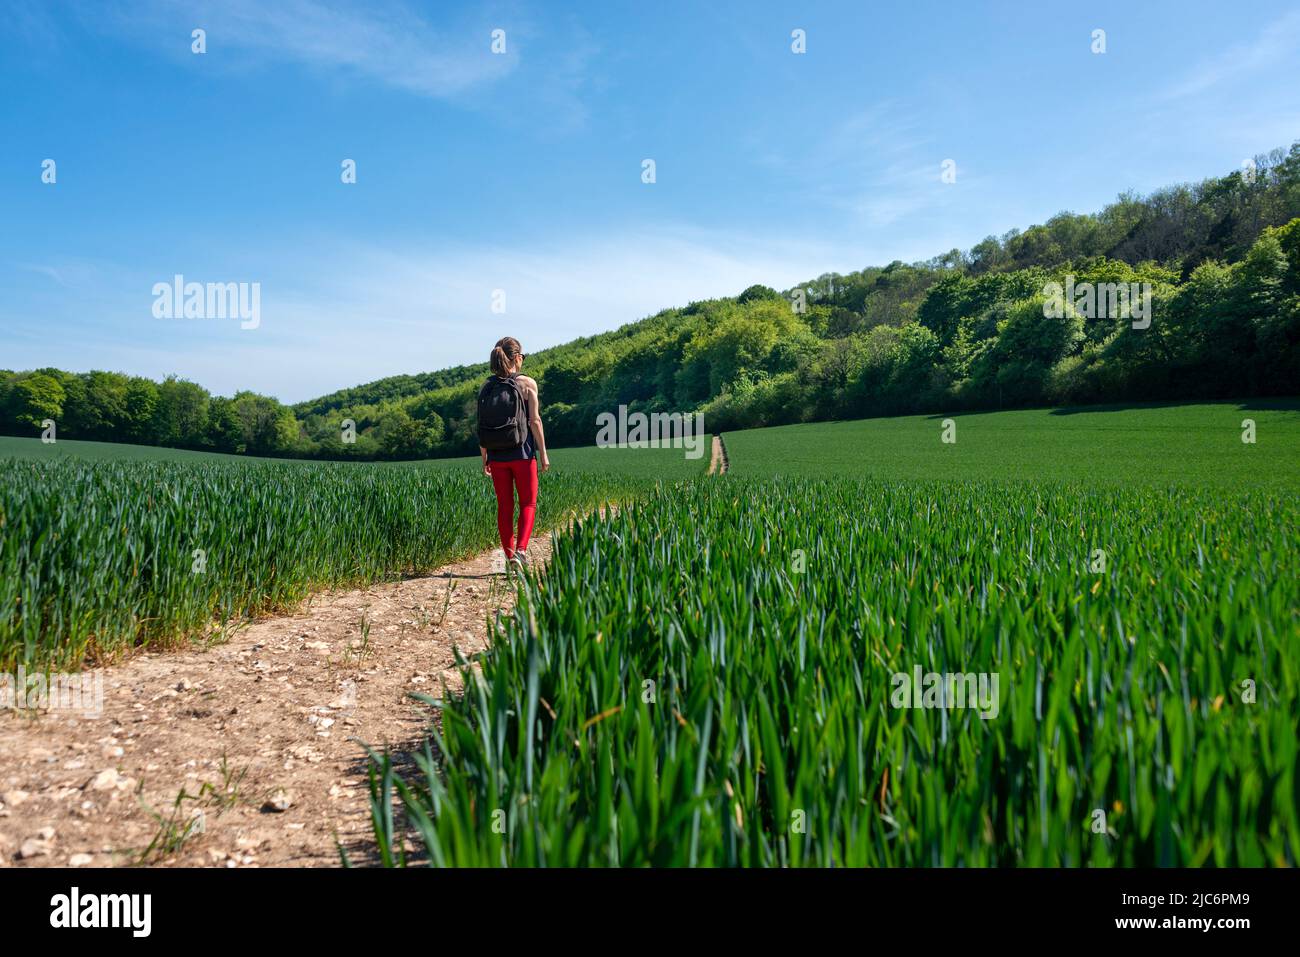 Rear view of a woman hiker walking on a footpath through a field Stock Photo